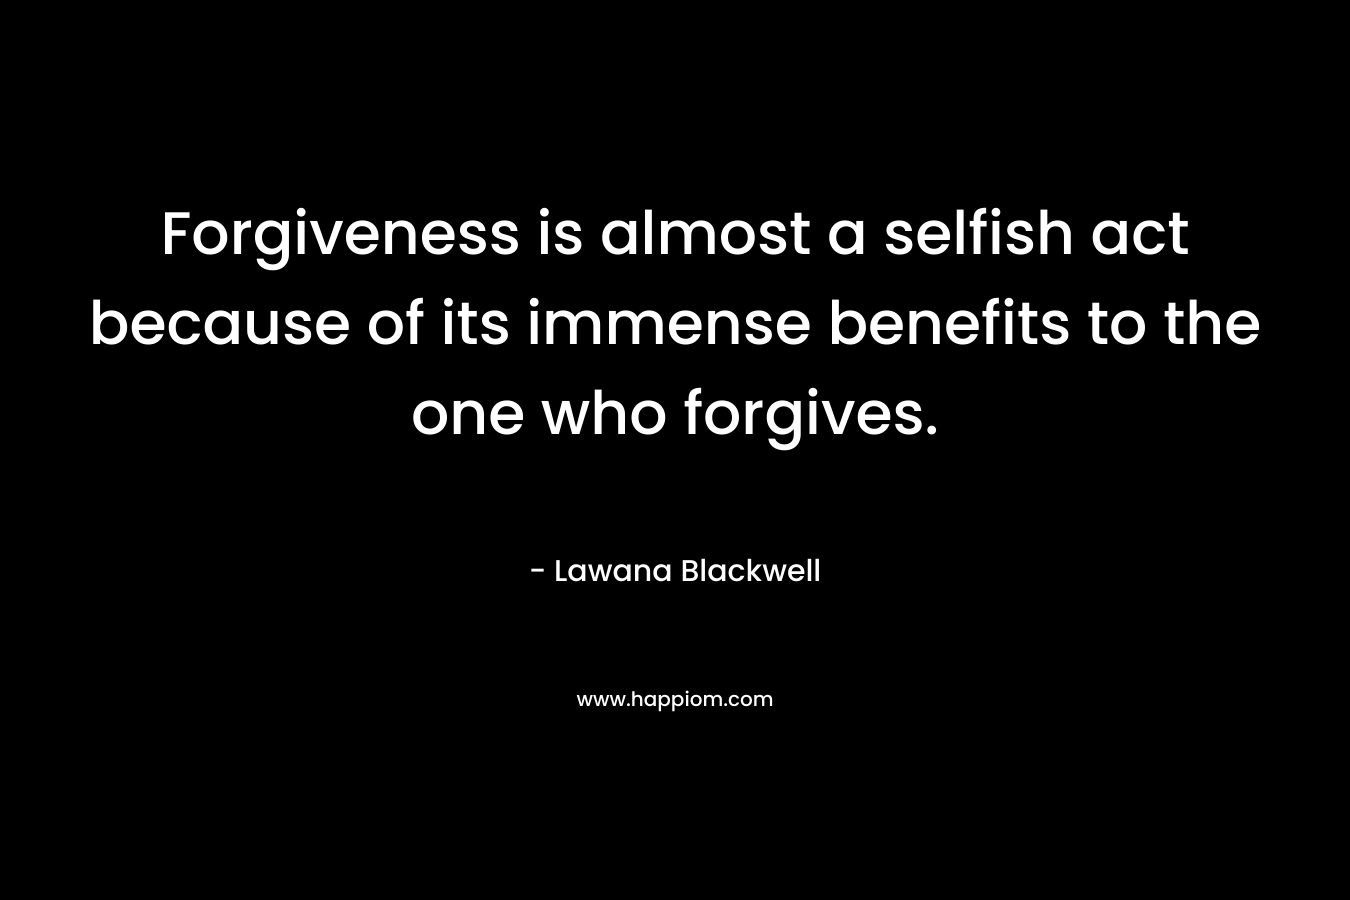 Forgiveness is almost a selfish act because of its immense benefits to the one who forgives. – Lawana Blackwell